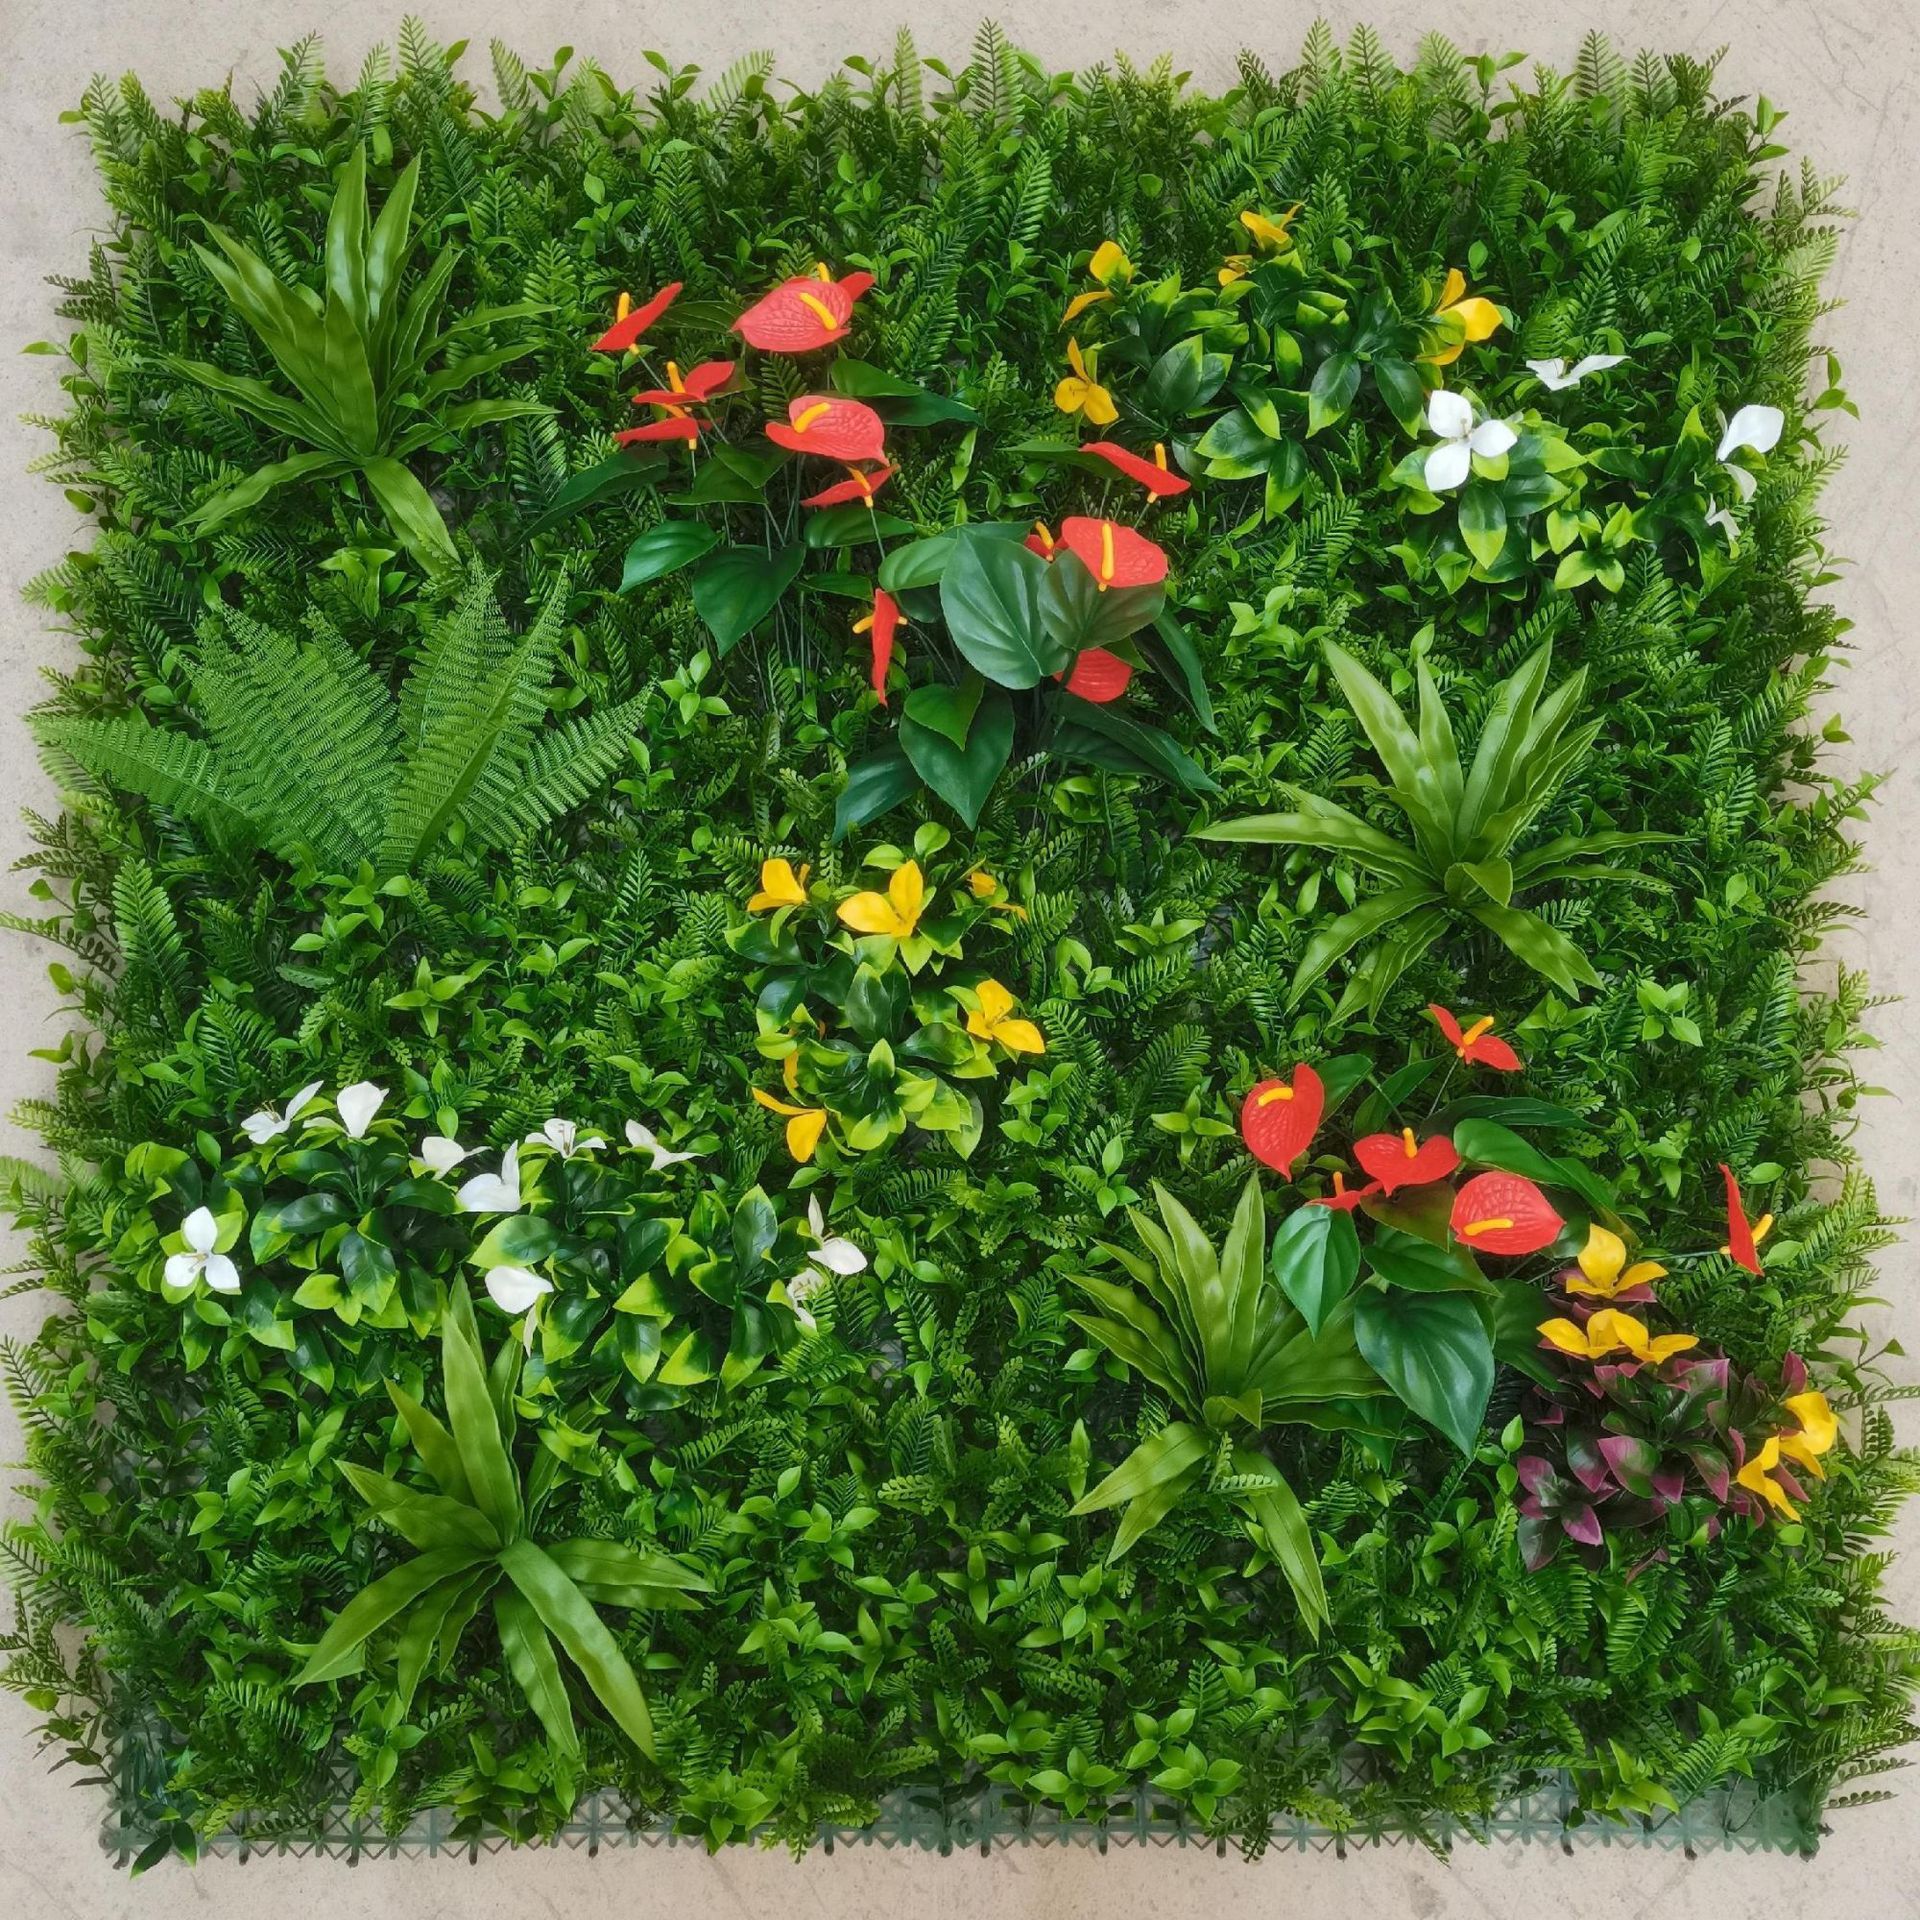 Artificial plant walls green plants artificial flowers simulated lawn landscaping biomimetic background wall decoration